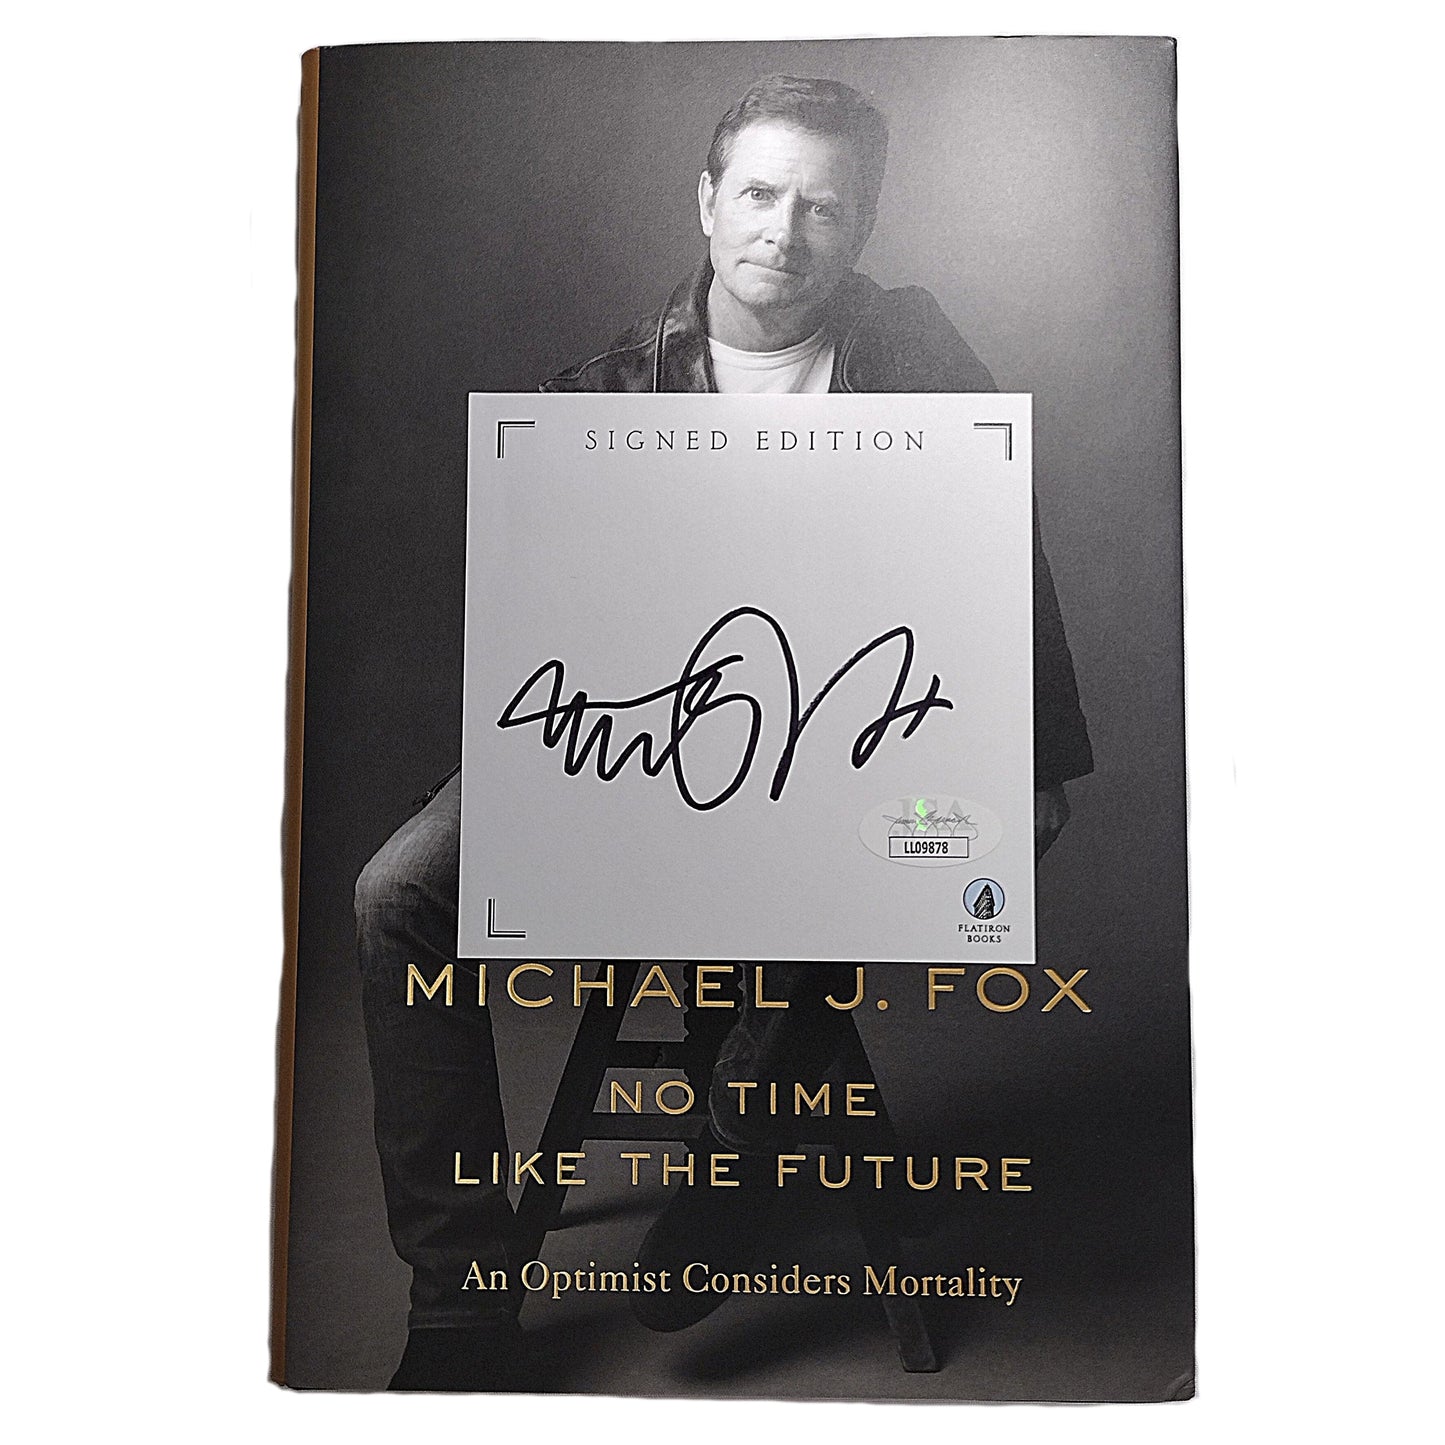 Hollywood- Autographed- Michael J. Fox Signed No Time Like The Future Hardcover 1st Edition Book with Bookplate JSA Authentication LL09878 - 103